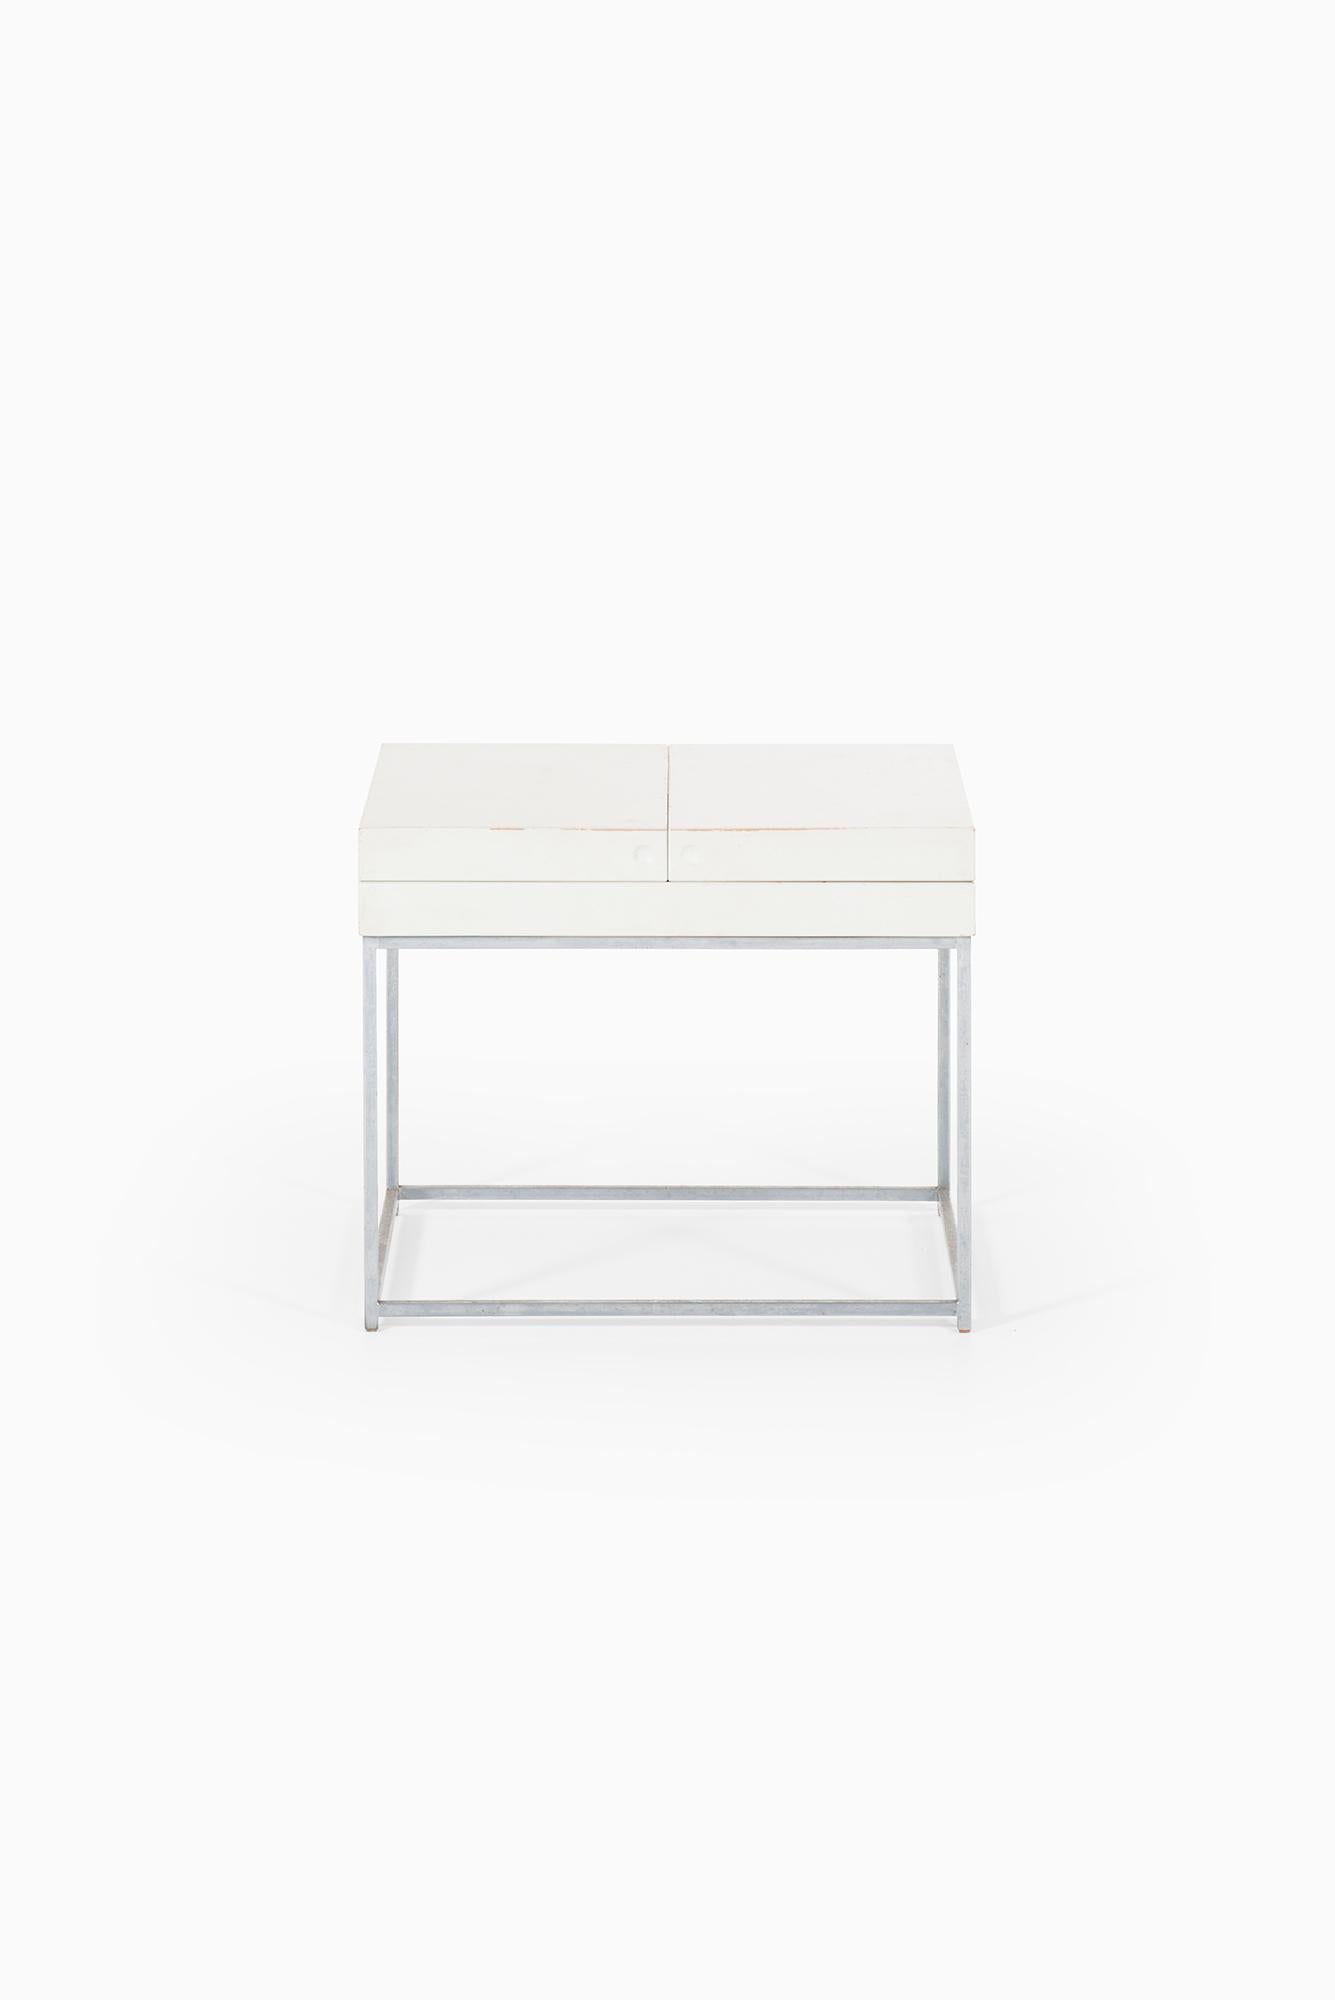 Side table in steel and white lacquered wood designed by Poul Nørreklit. Produced by Selectform in Denmark.